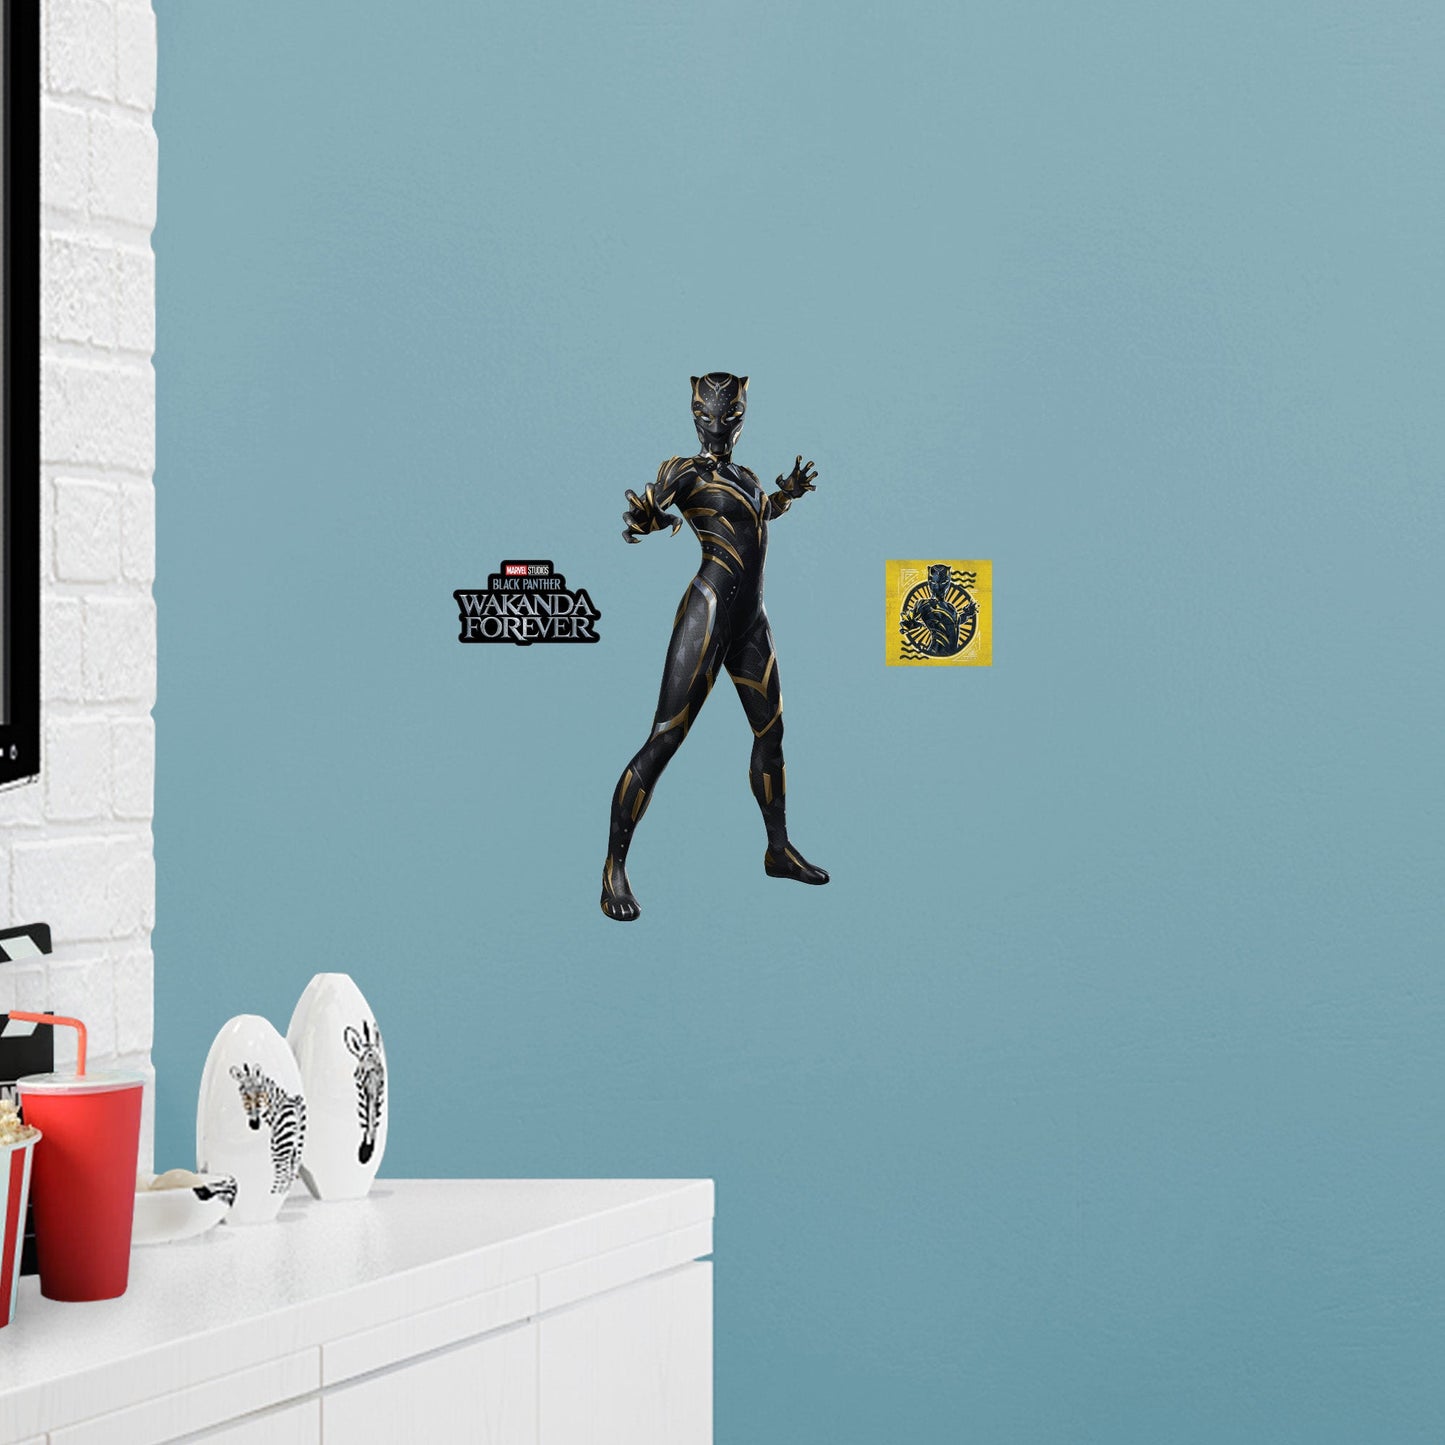 Black Panther Wakanda Forever: Black Panther RealBig - Officially Licensed Marvel Removable Adhesive Decal